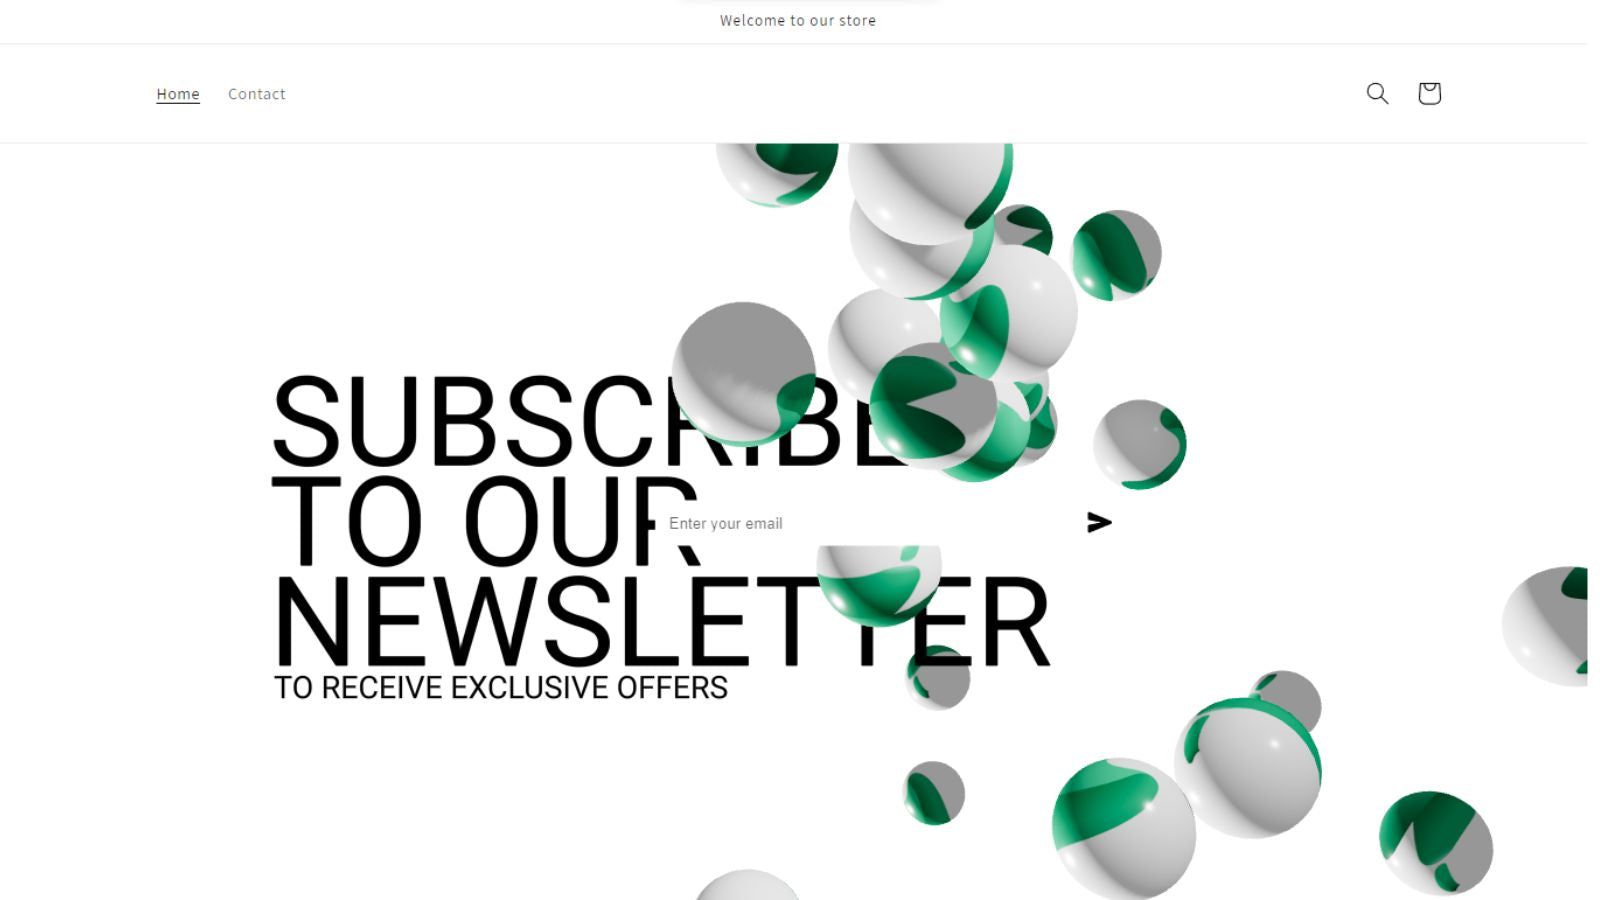 Demo image of 3D bubble newsletter section with logo texture